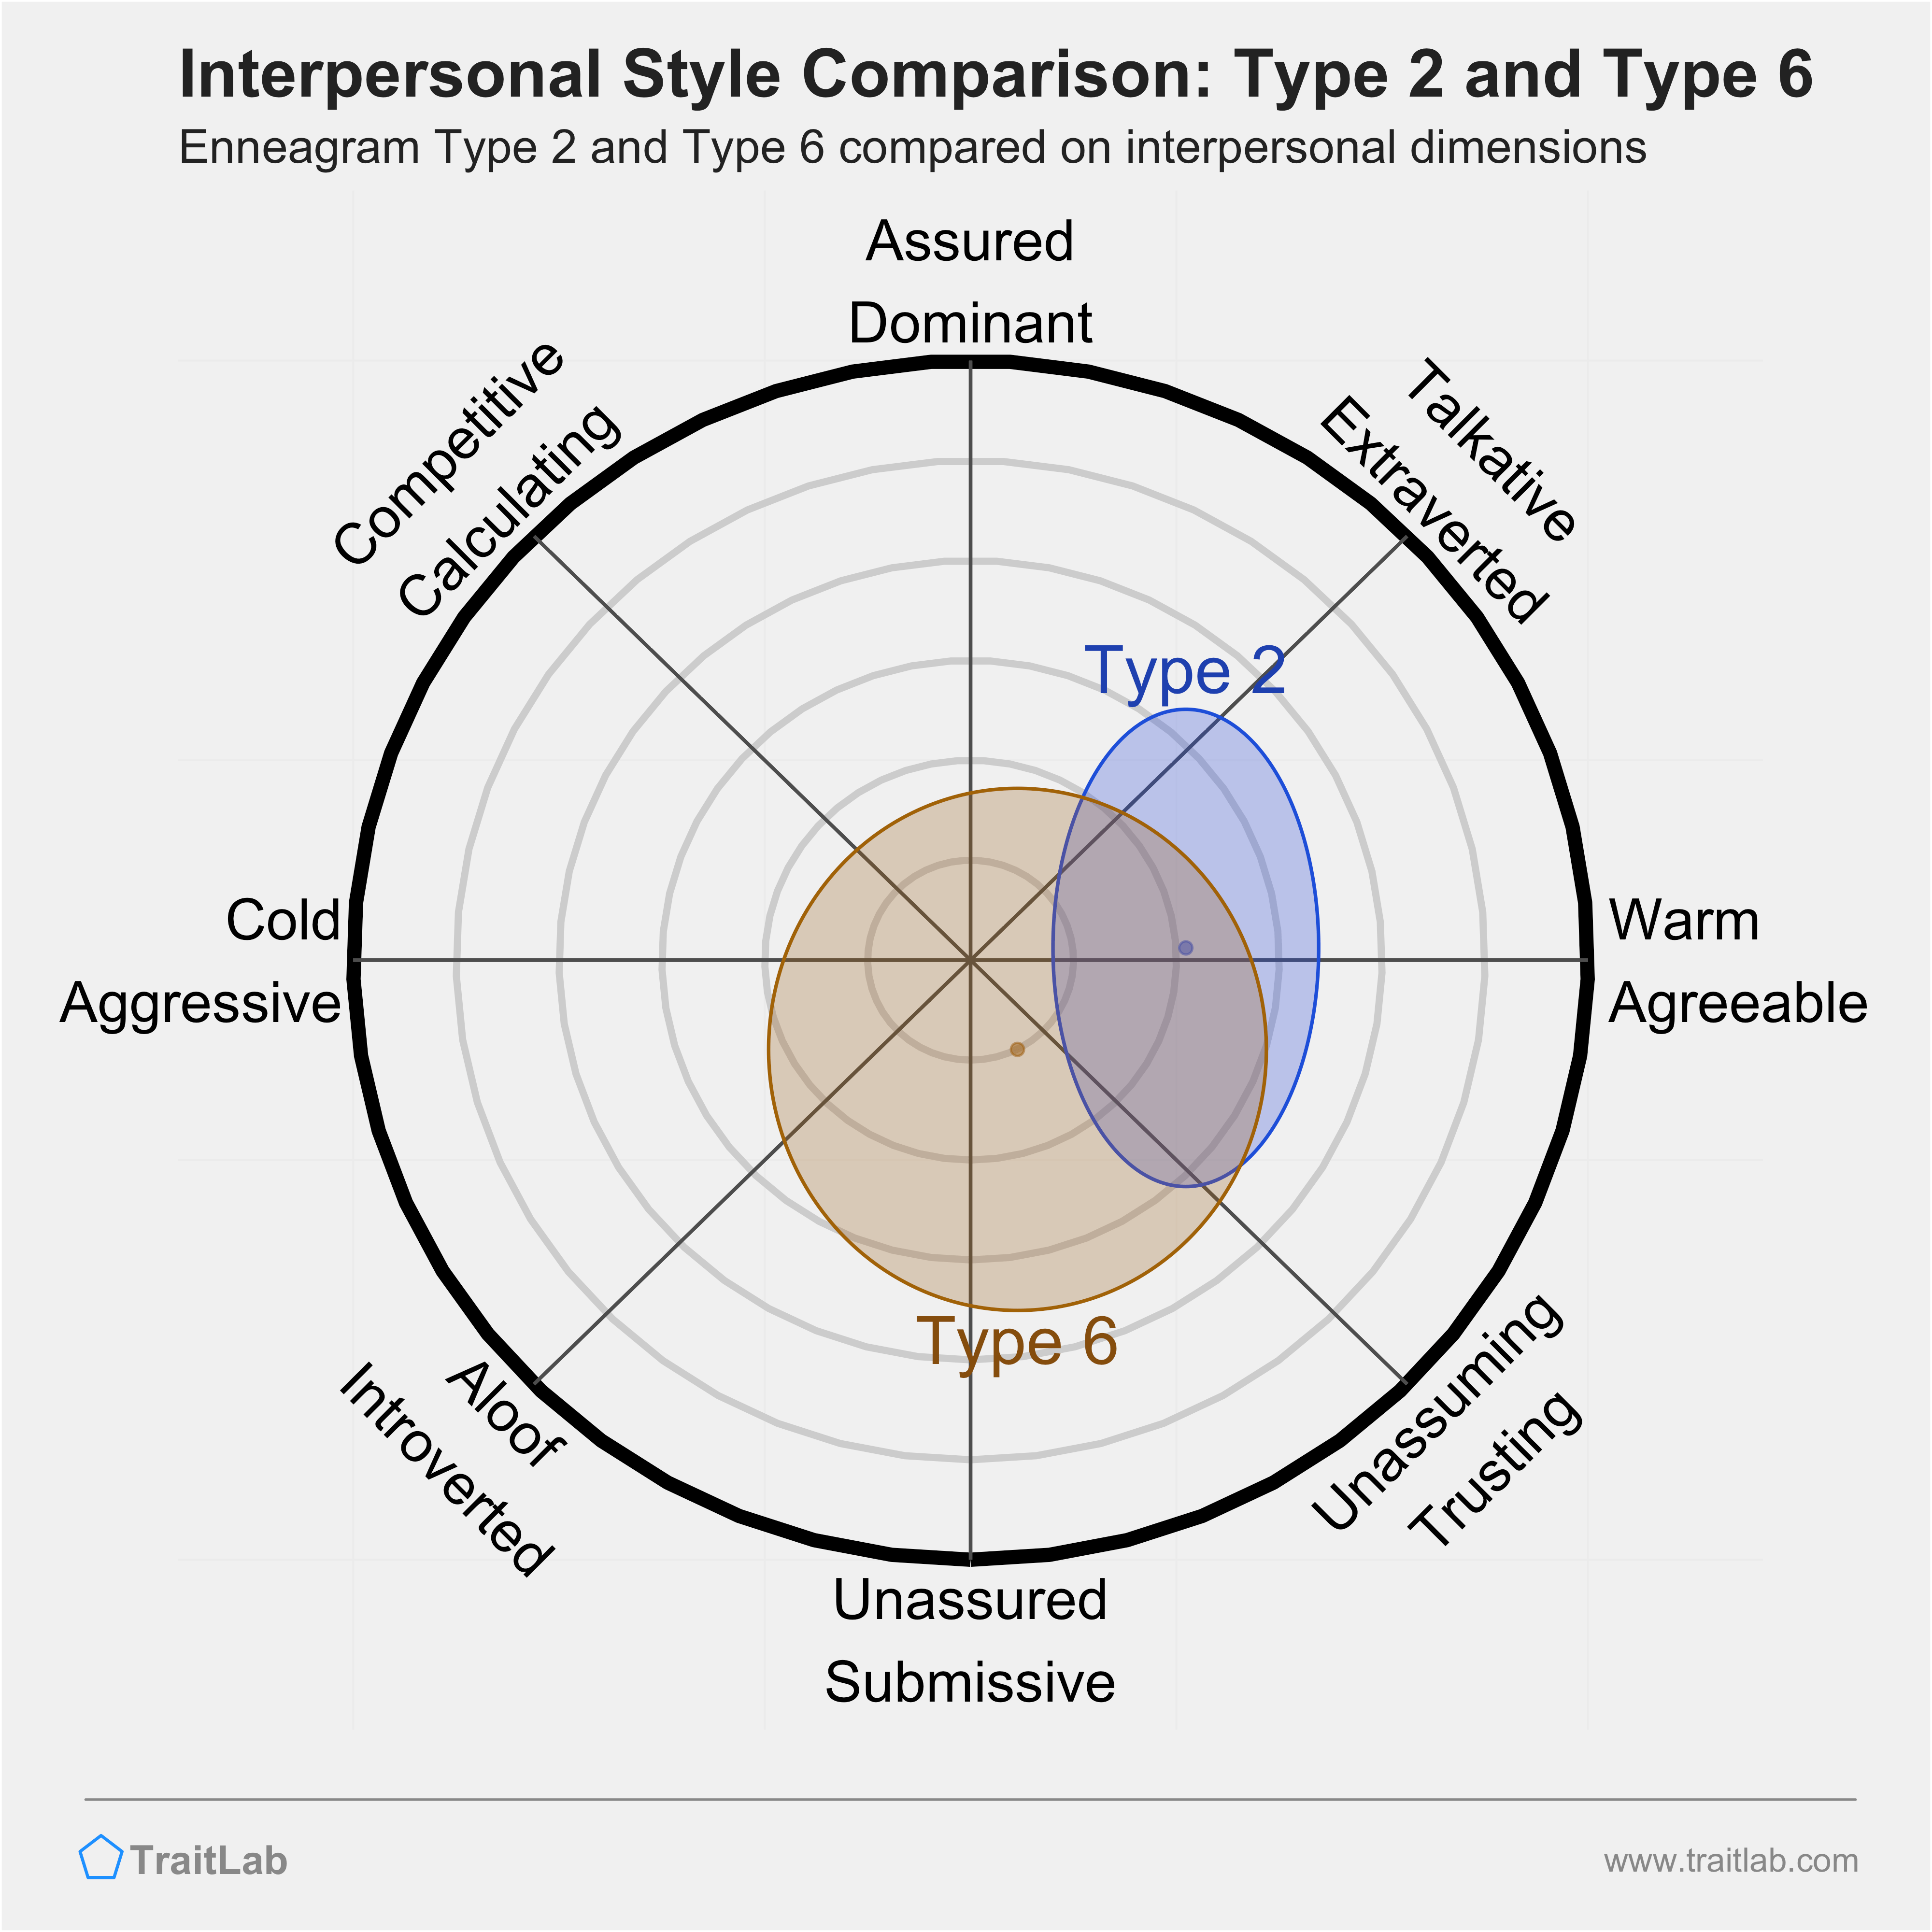 Enneagram Type 2 and Type 6 comparison across interpersonal dimensions